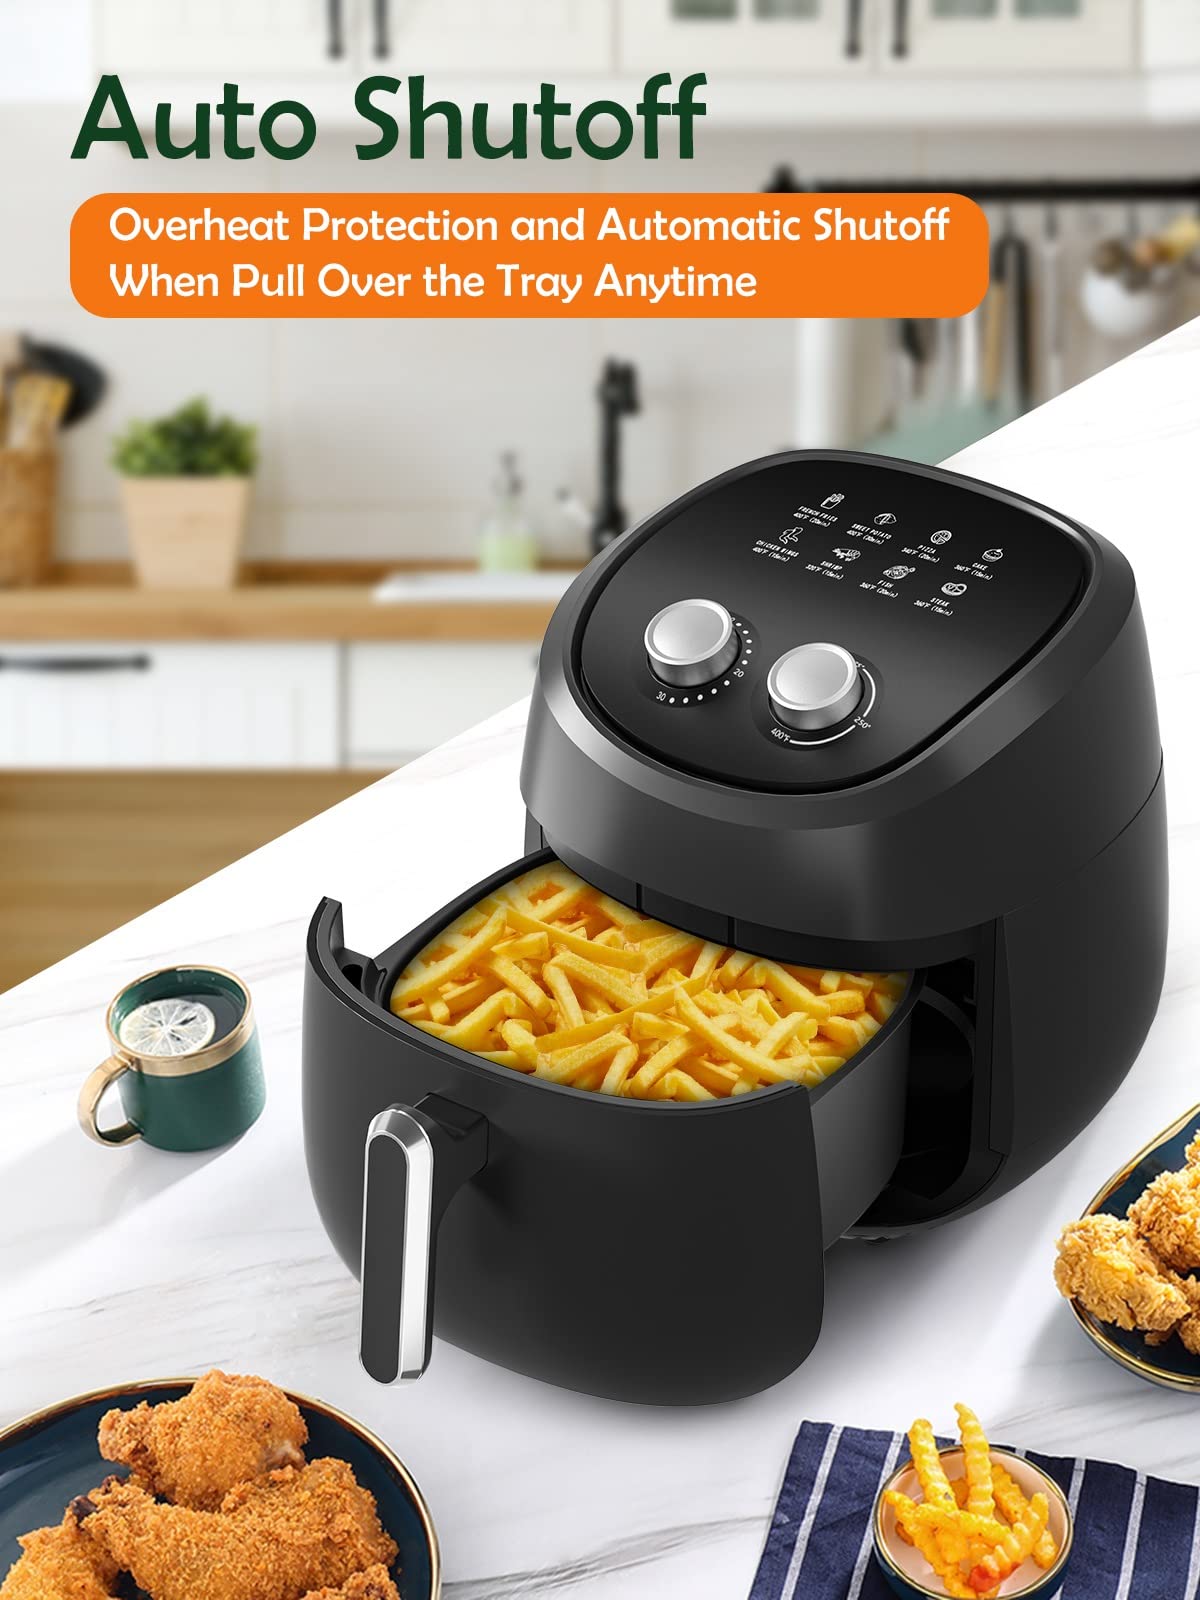 Air Fryer 8 Preset Menus 4.5 QT Airfryer Easy to Use with Adjustable Temperature Control with 8 Cooking References Nonstick Tray Auto Shutoff 1400W Hot Air Fryer Black